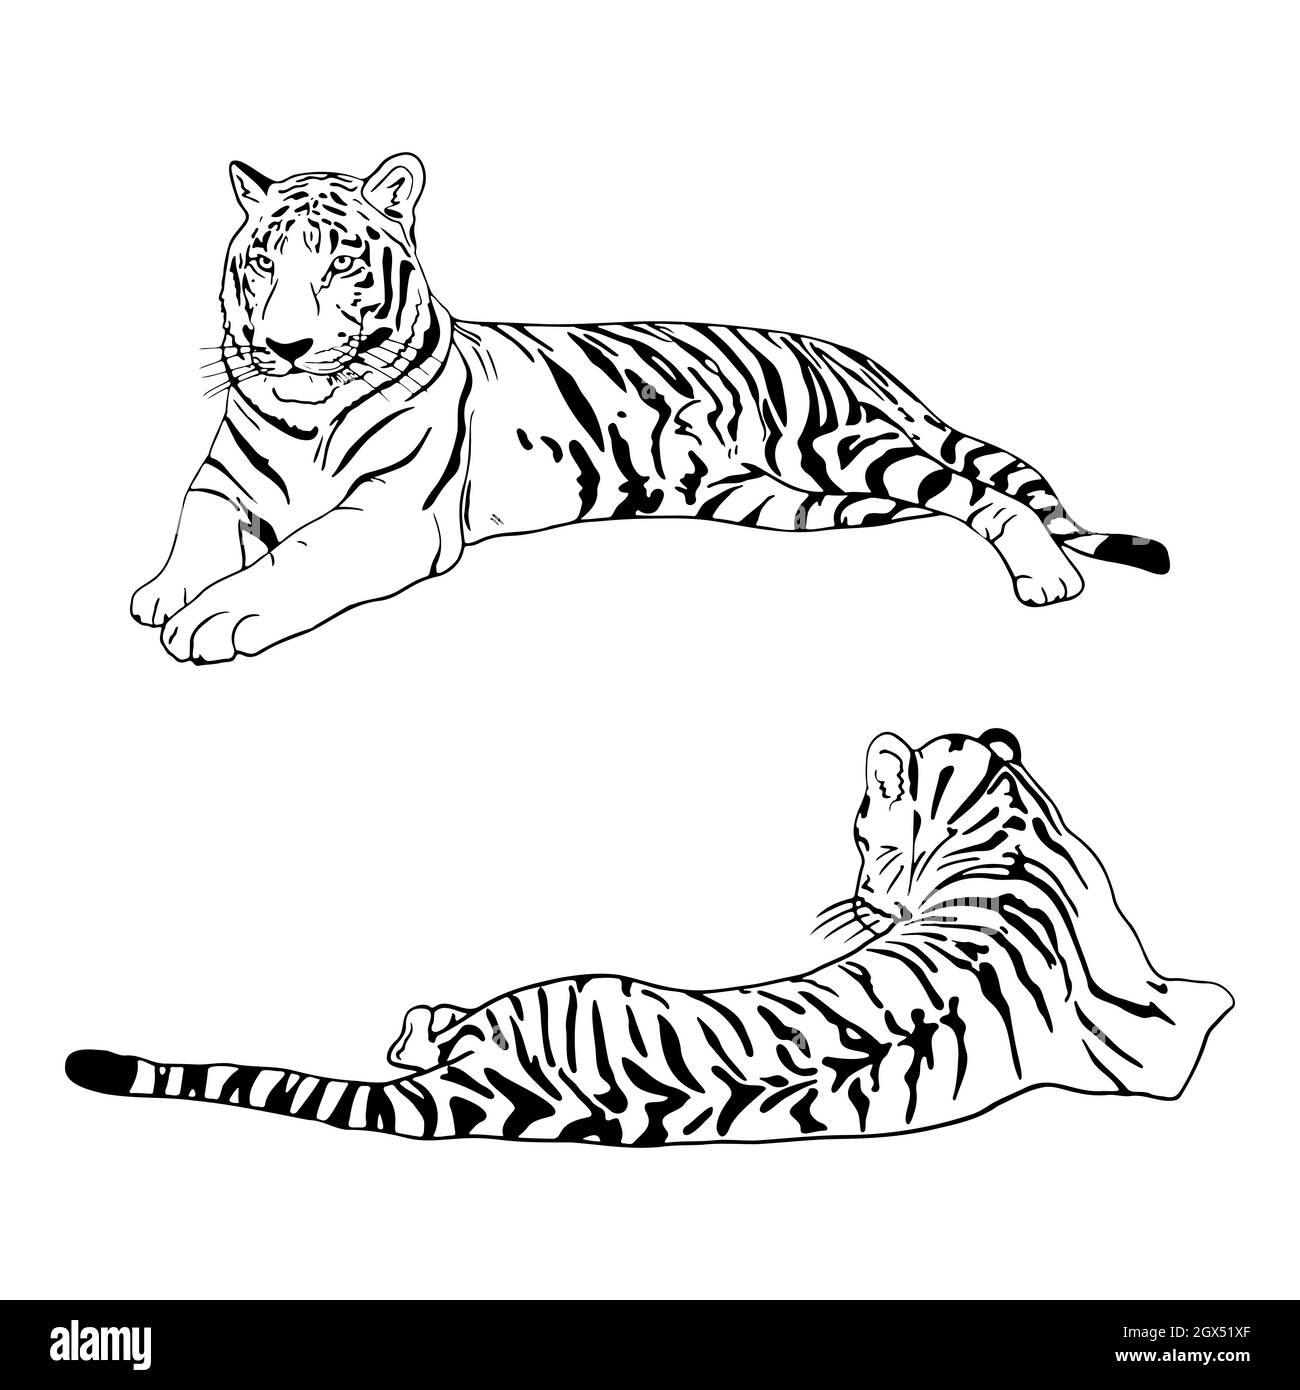 How to Draw a Tiger - Really Easy Drawing Tutorial